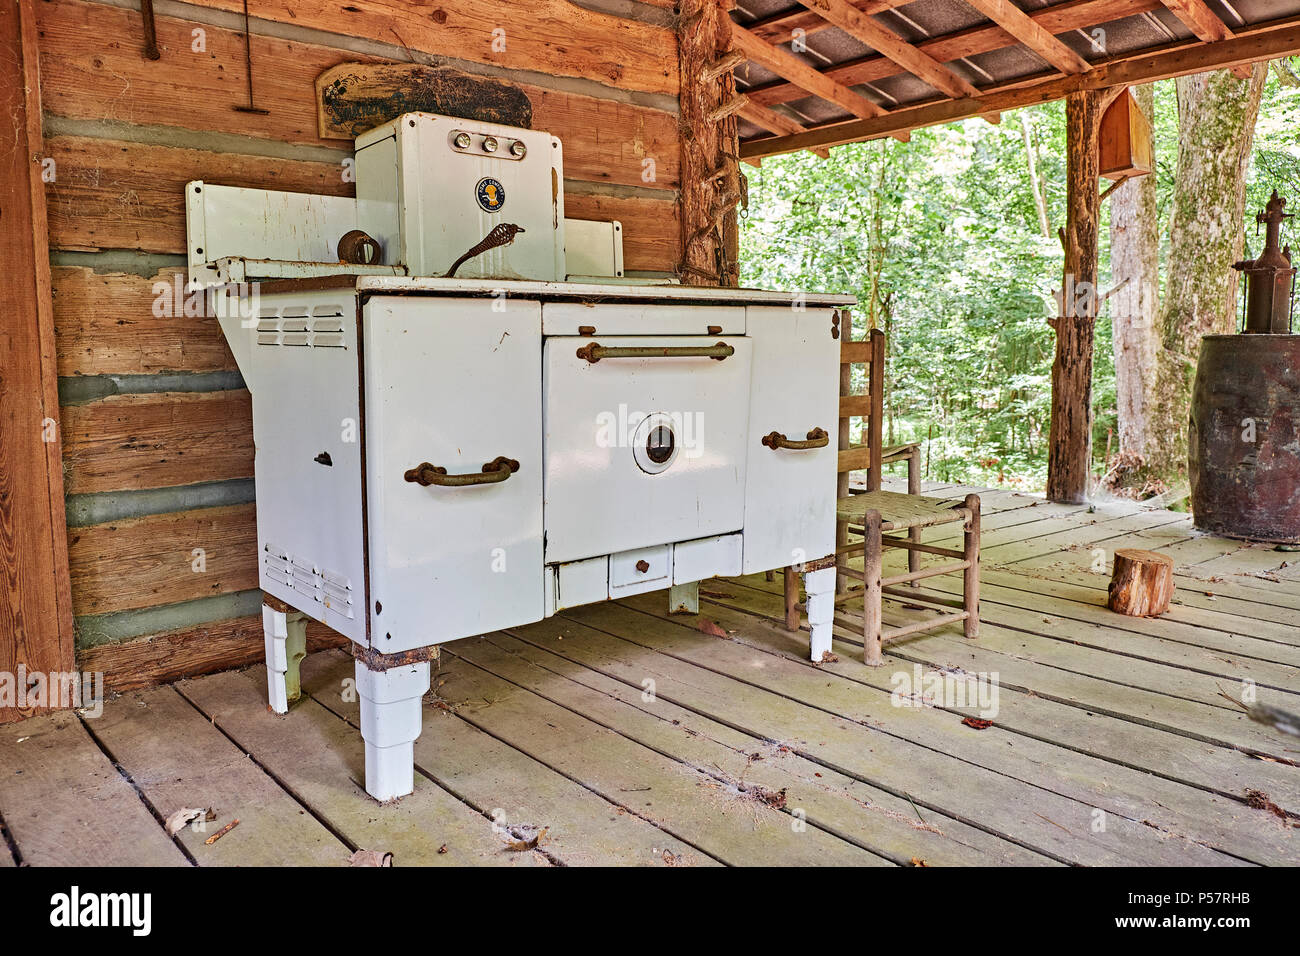 Vintage antique wrought iron wood or coal burning stove made by Home Comfort, circa 1864 located in rural Alabama. Stock Photo